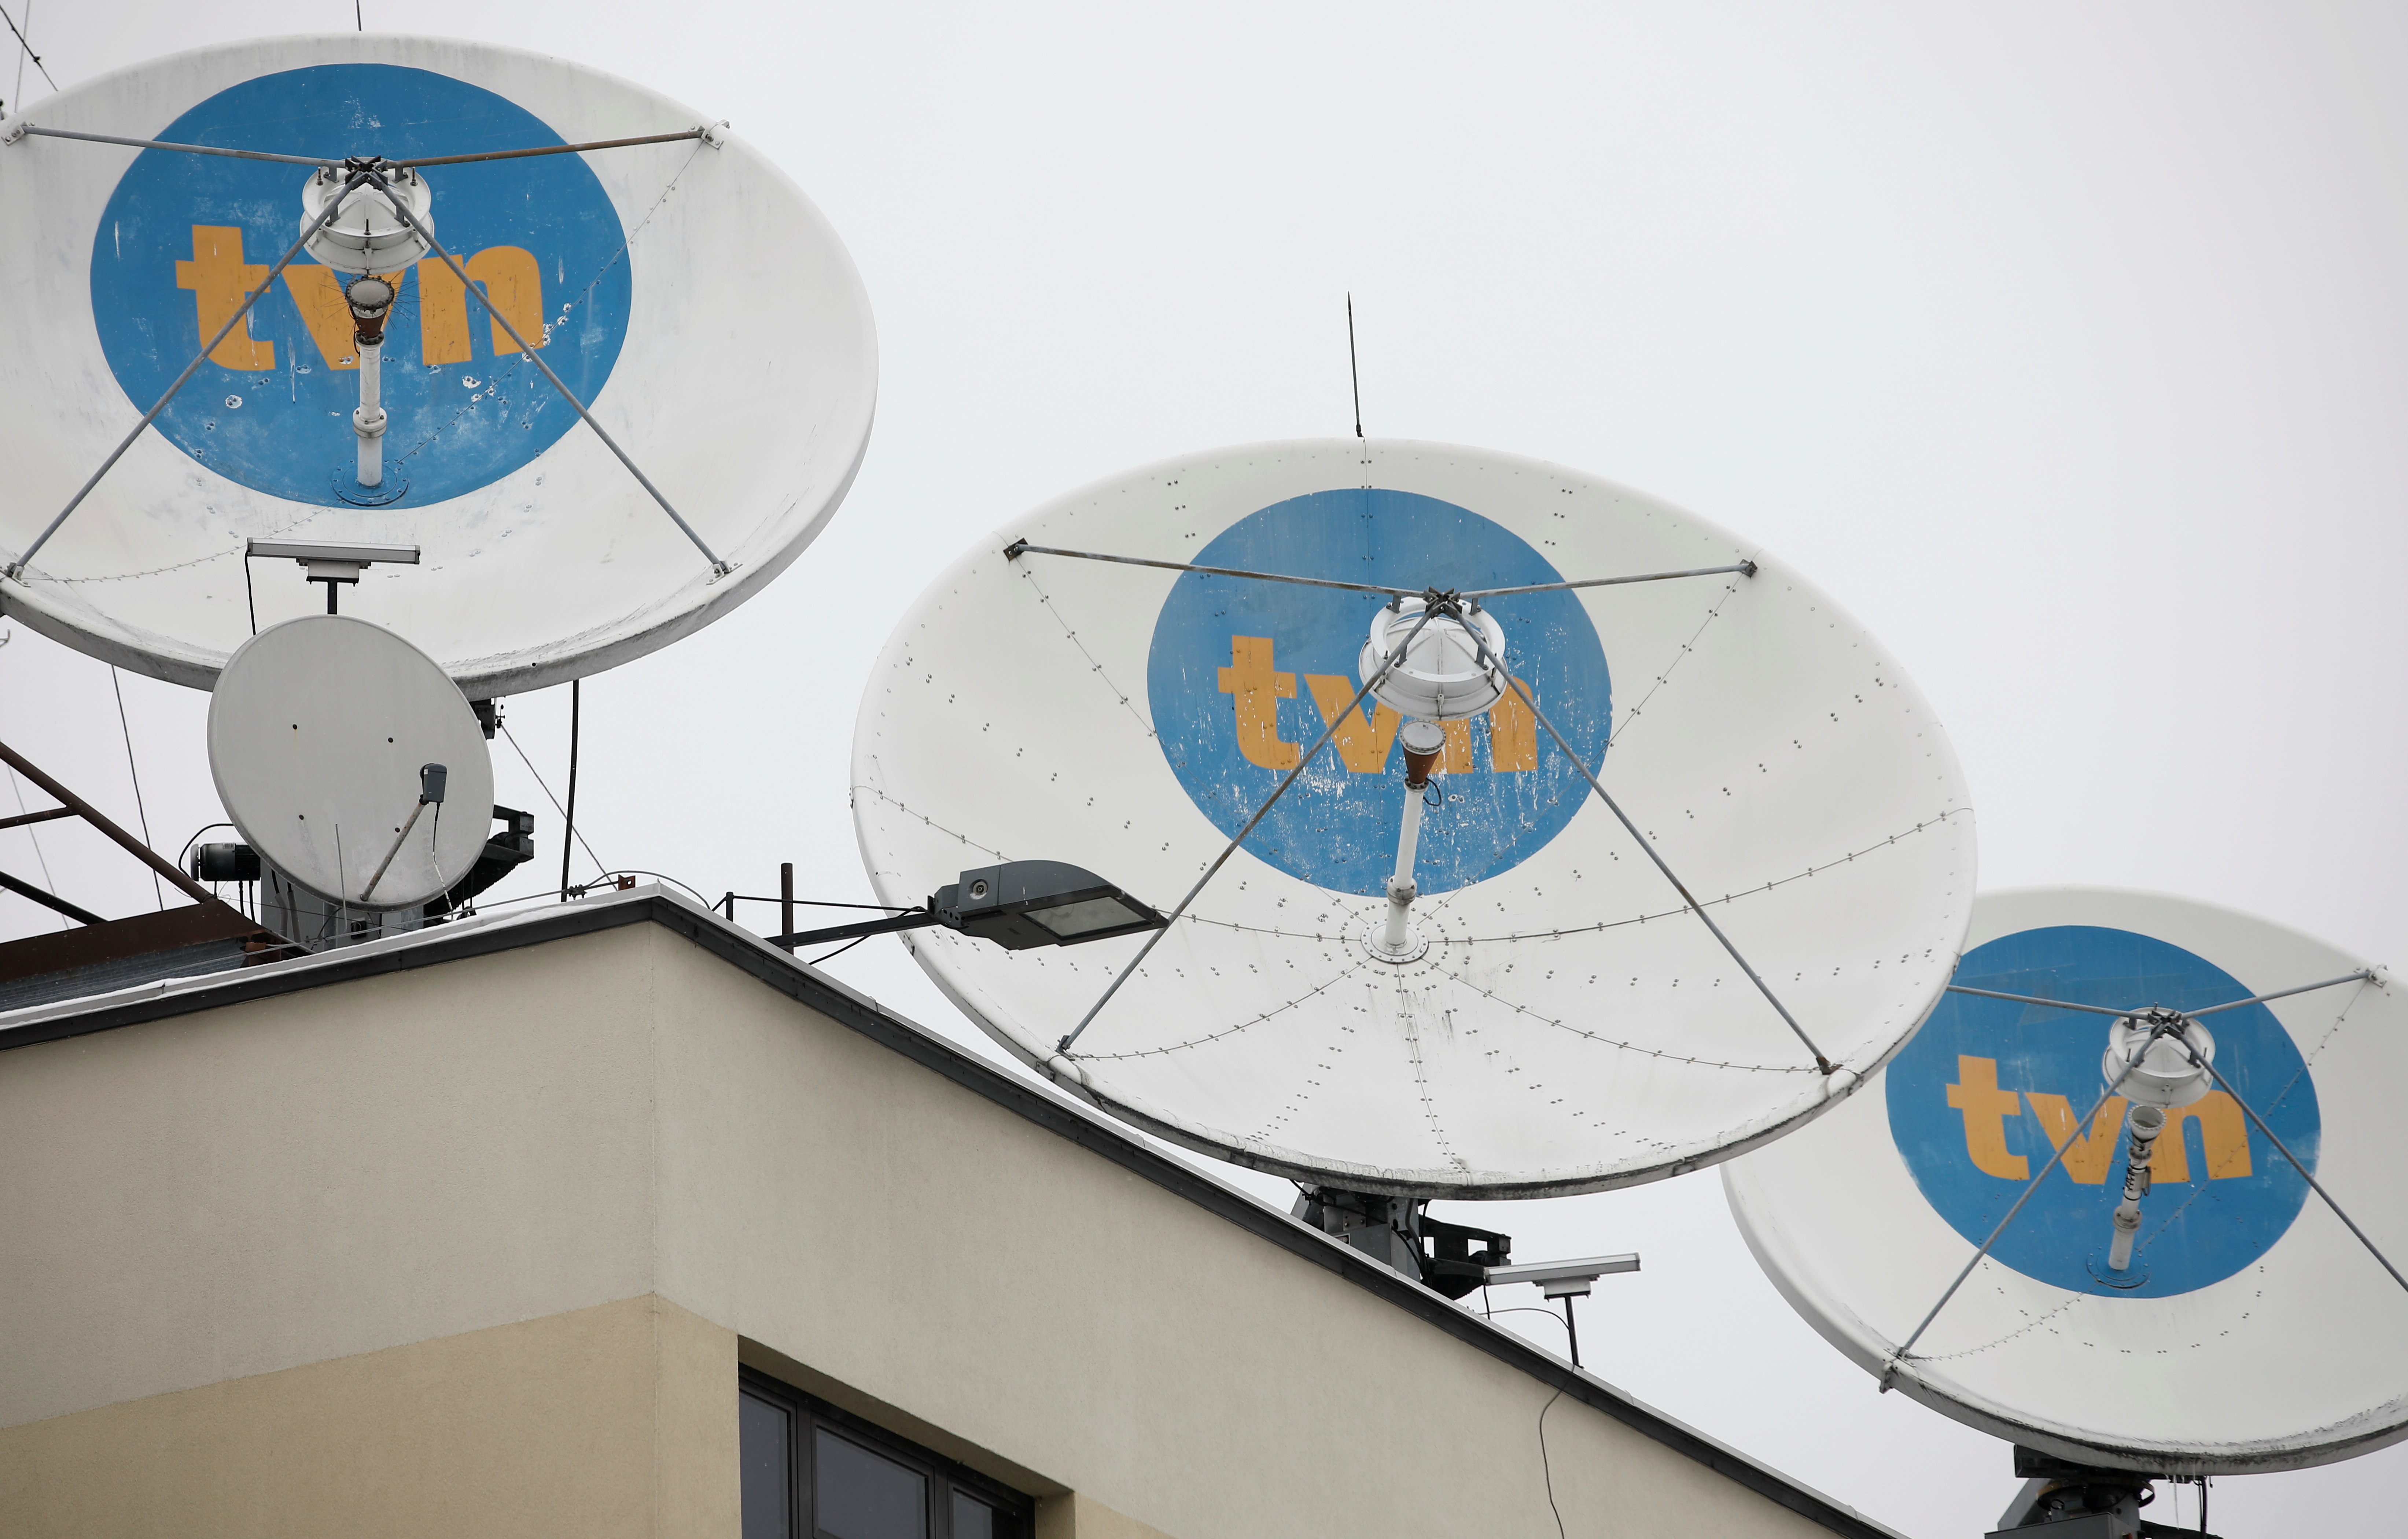 Private television TVN logo is seen on satellite antennas at their headquarters in Warsaw